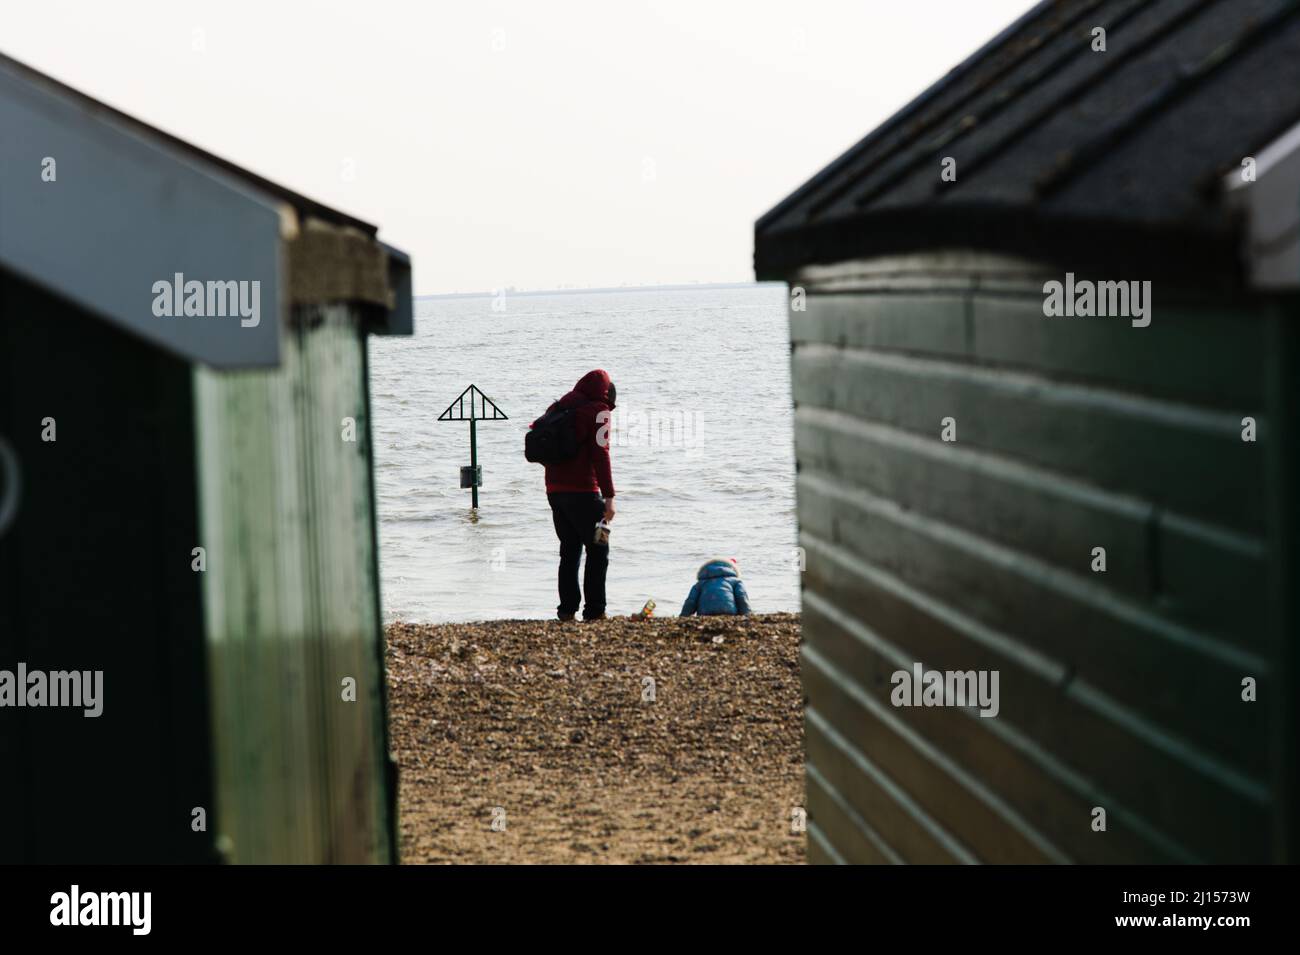 Fatherhood Concept - Rear view of a father and child at the seaside. Stock Photo